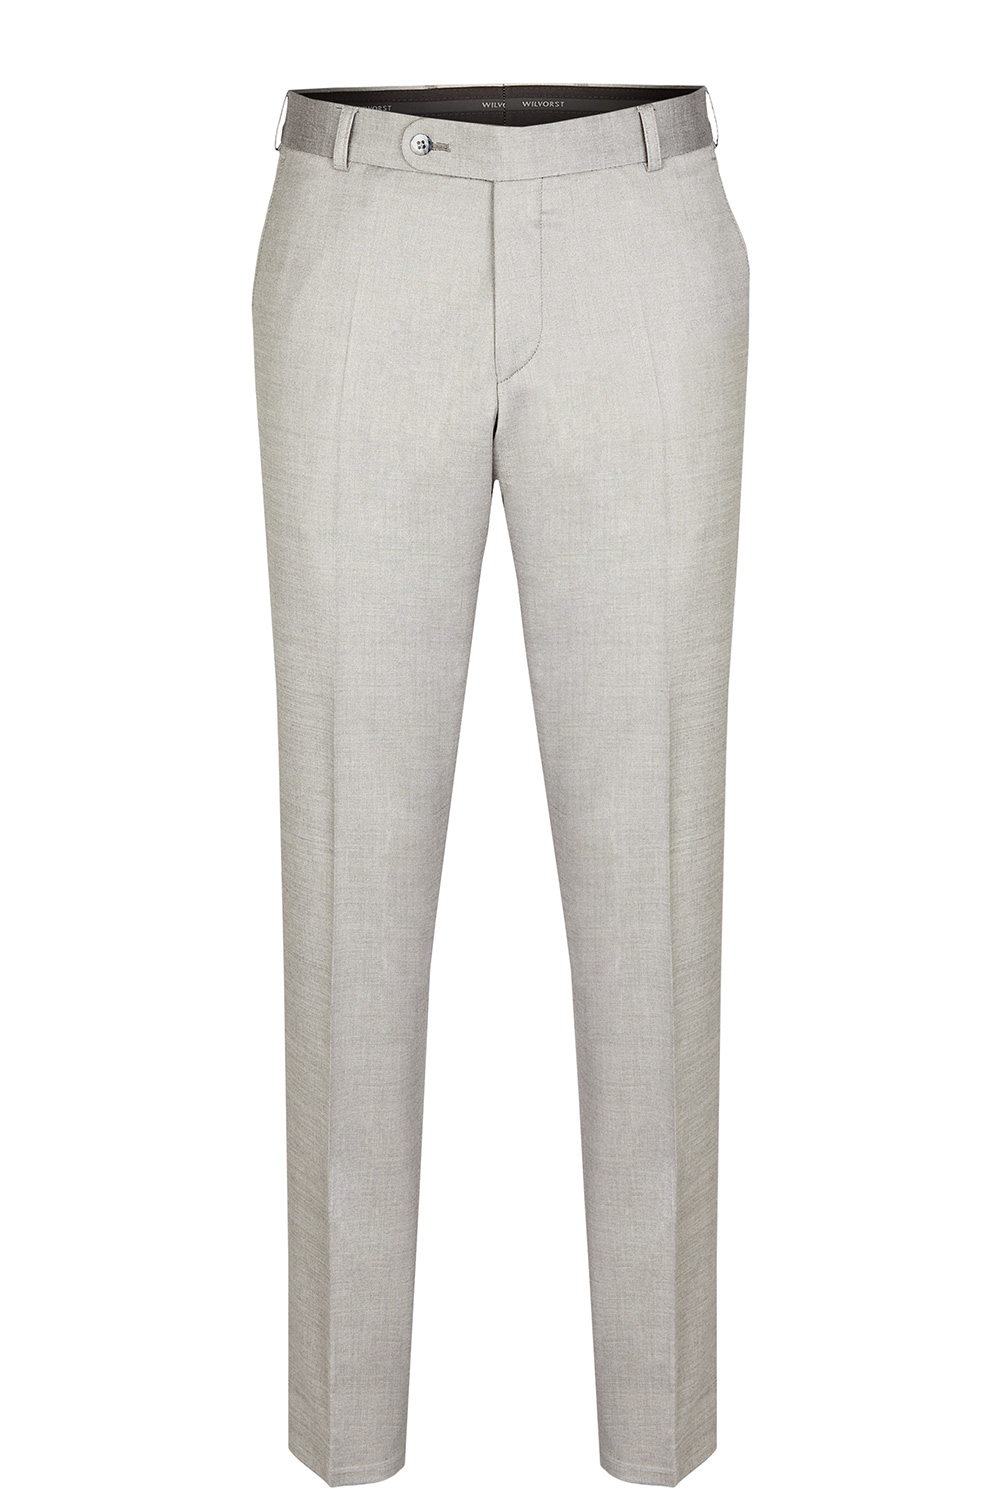 Silver Grey 3 piece Wedding Suit - Tom Murphy's Formal and Menswear